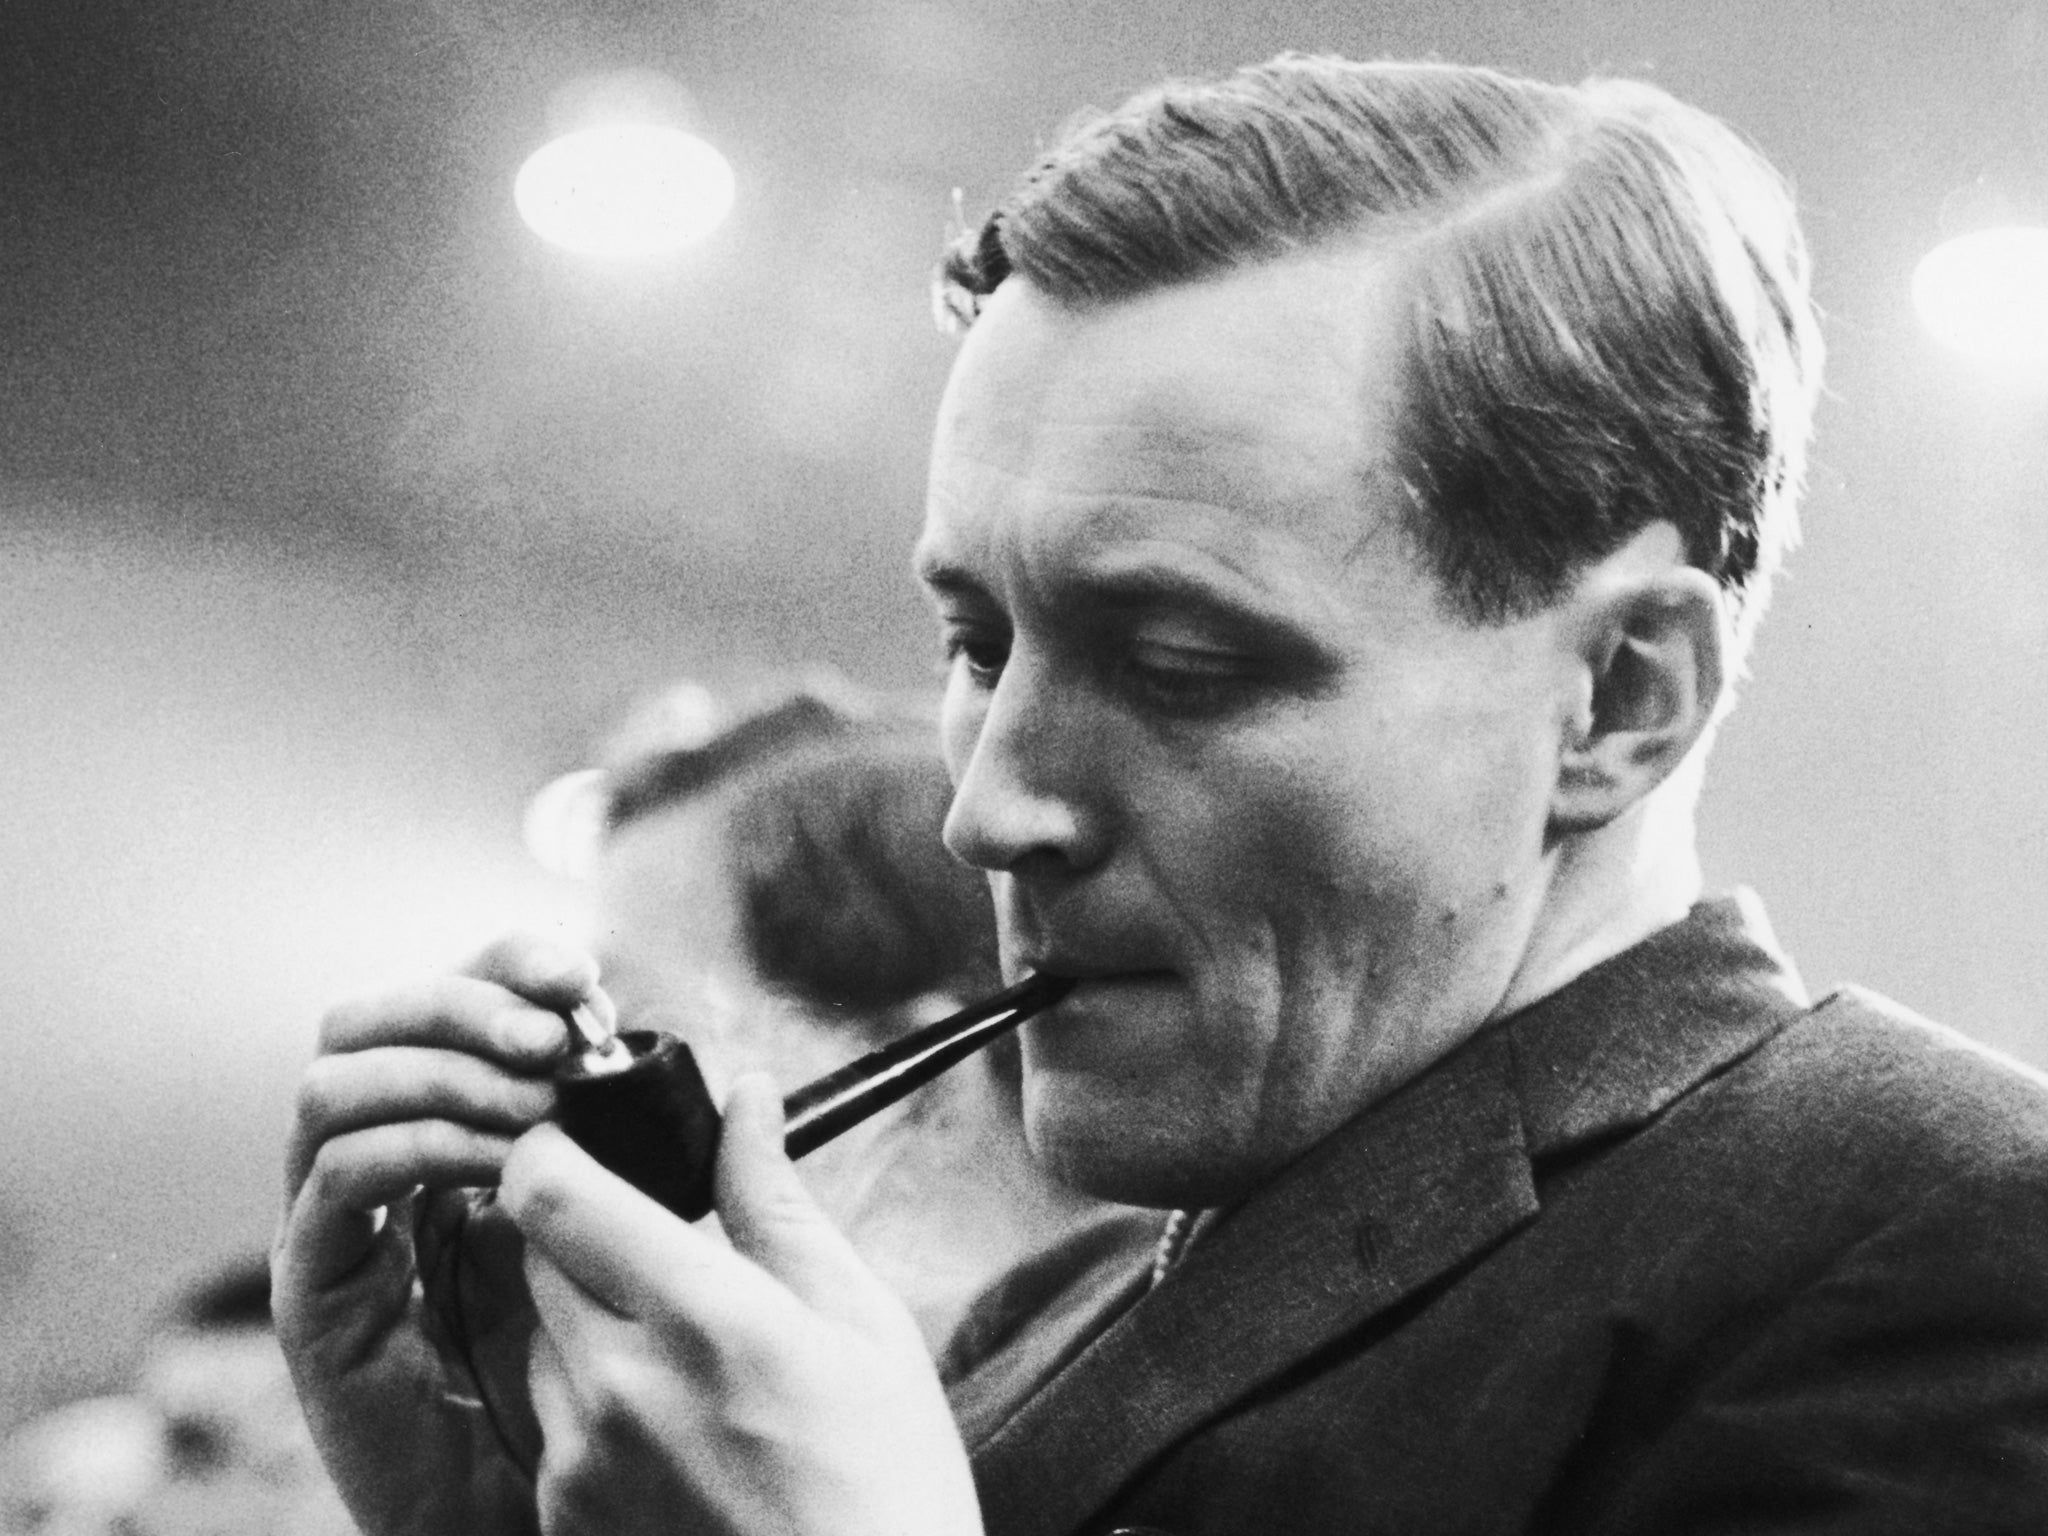 October 1962: Tony Benn lights his pipe during a speech at the Labour Party conference in Brighton